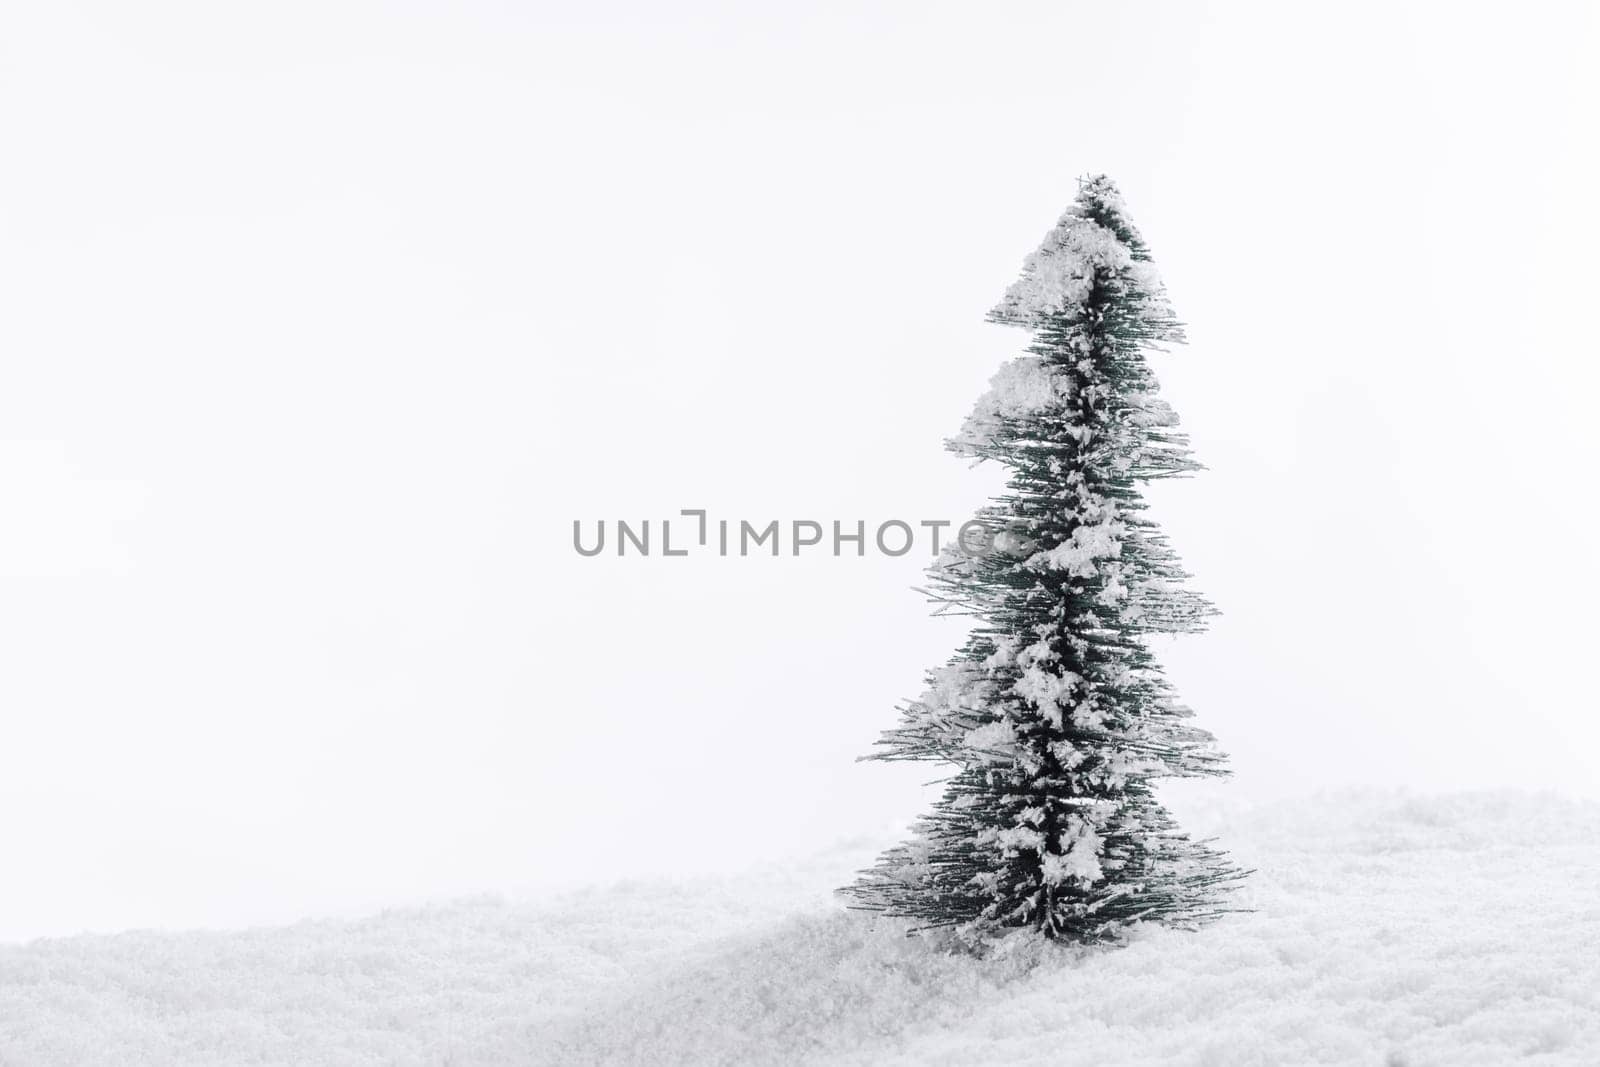 Miniature decorative Christmas tree placed on snow isolated on white